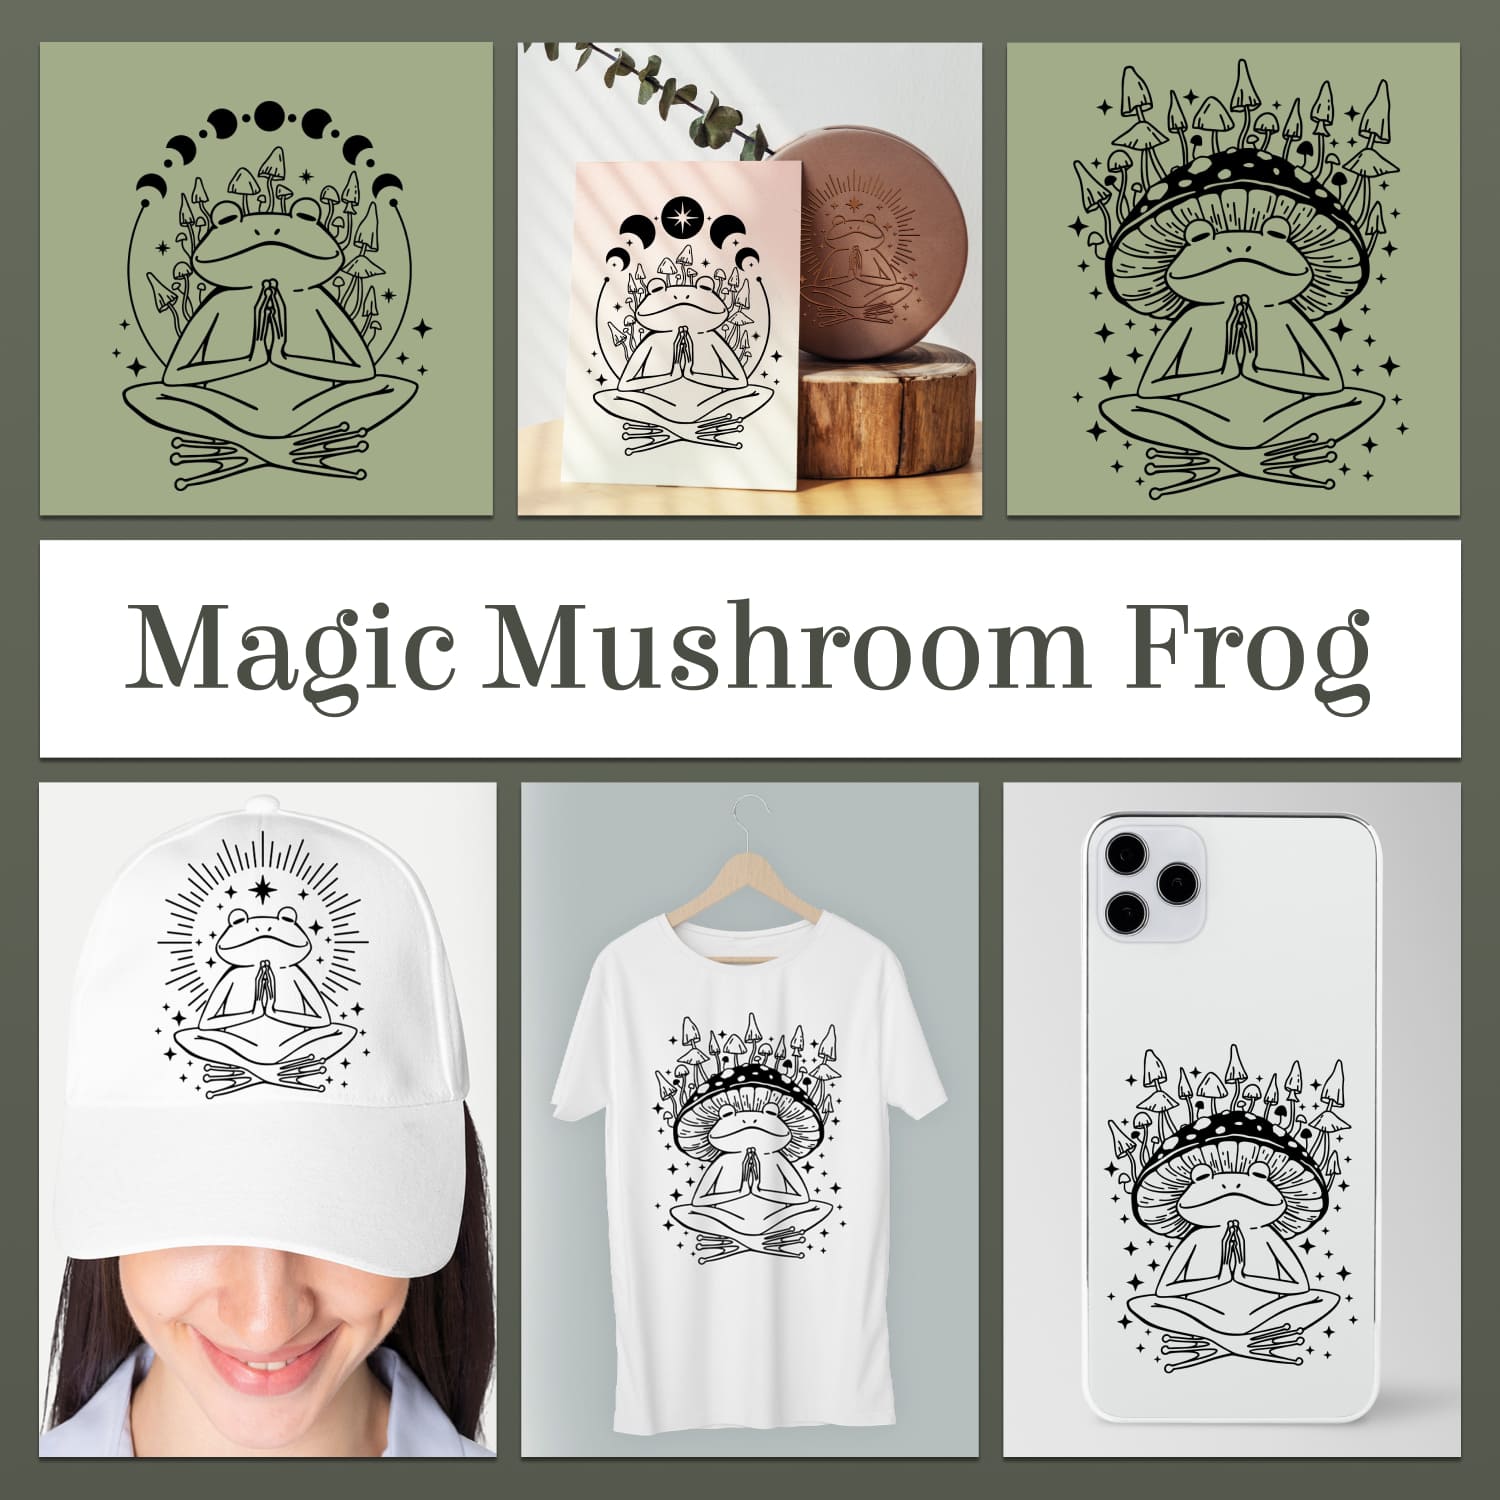 Woman wearing a white hat and t - shirt with the words magic mushroom frog.